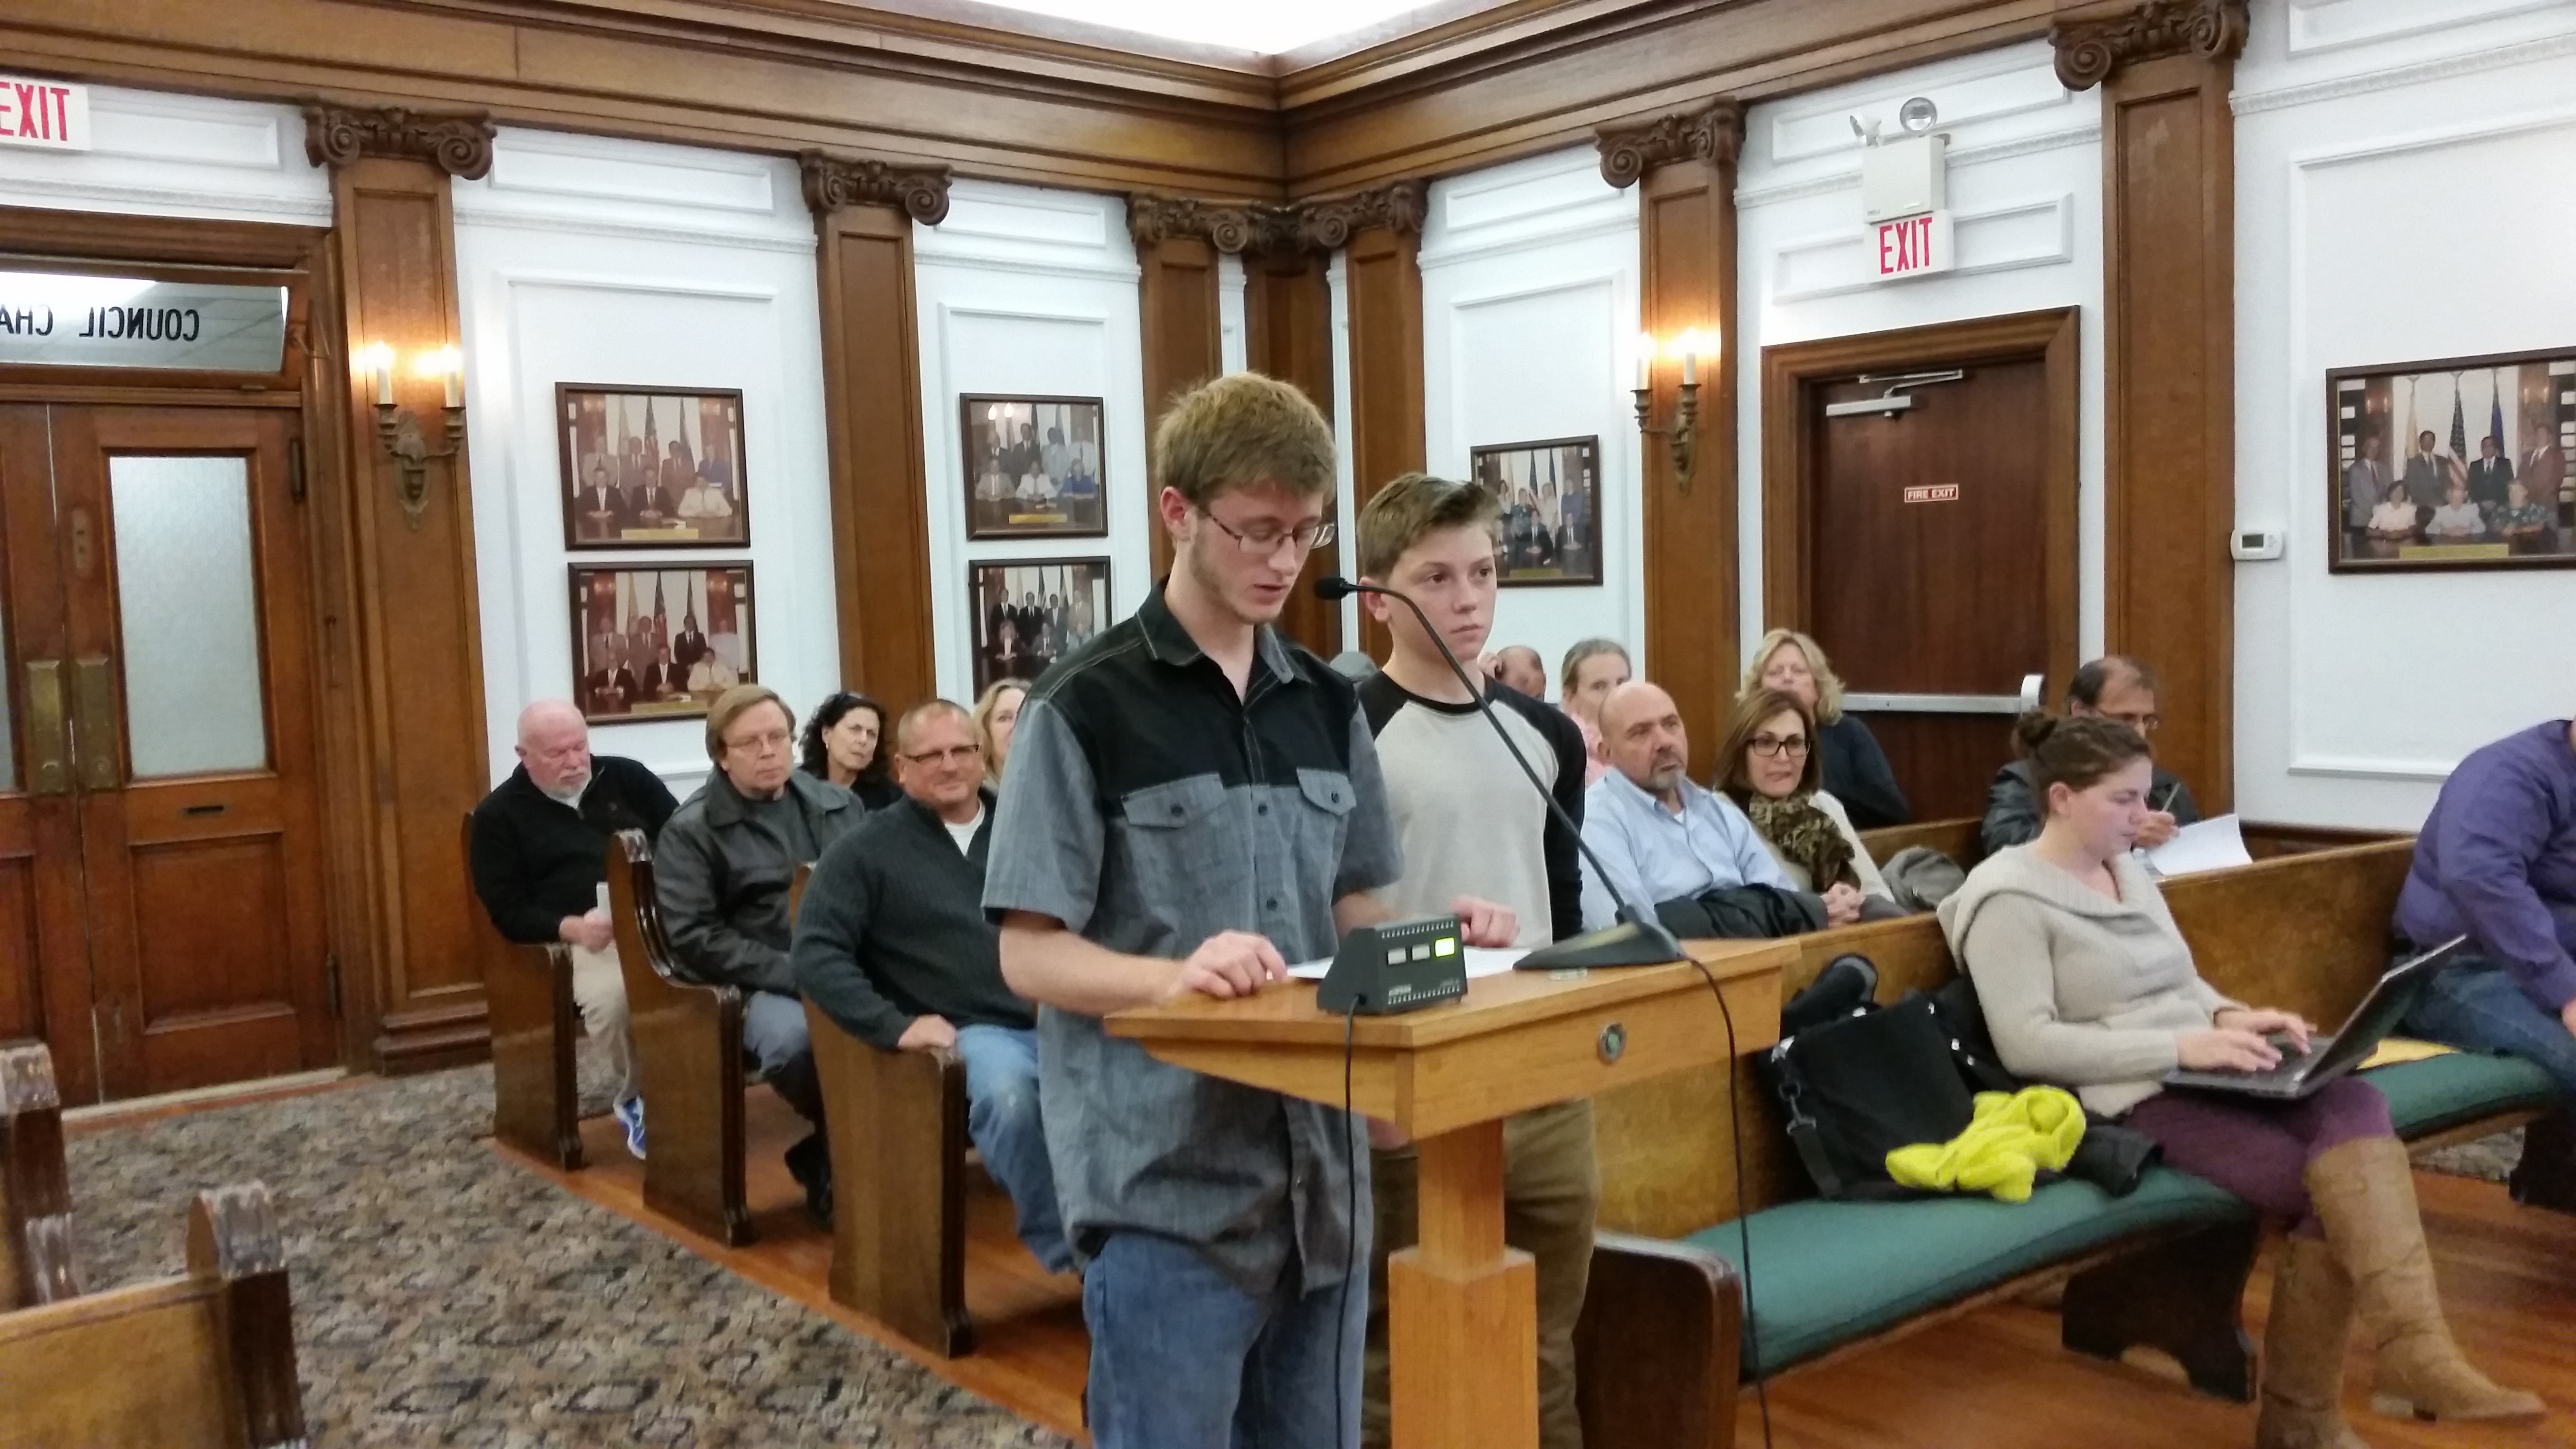 Andrew Leonetti, left, and Ricky Hardin, who both play in the same band, object to the proposed ordinance that would regulate Boardwalk performers.